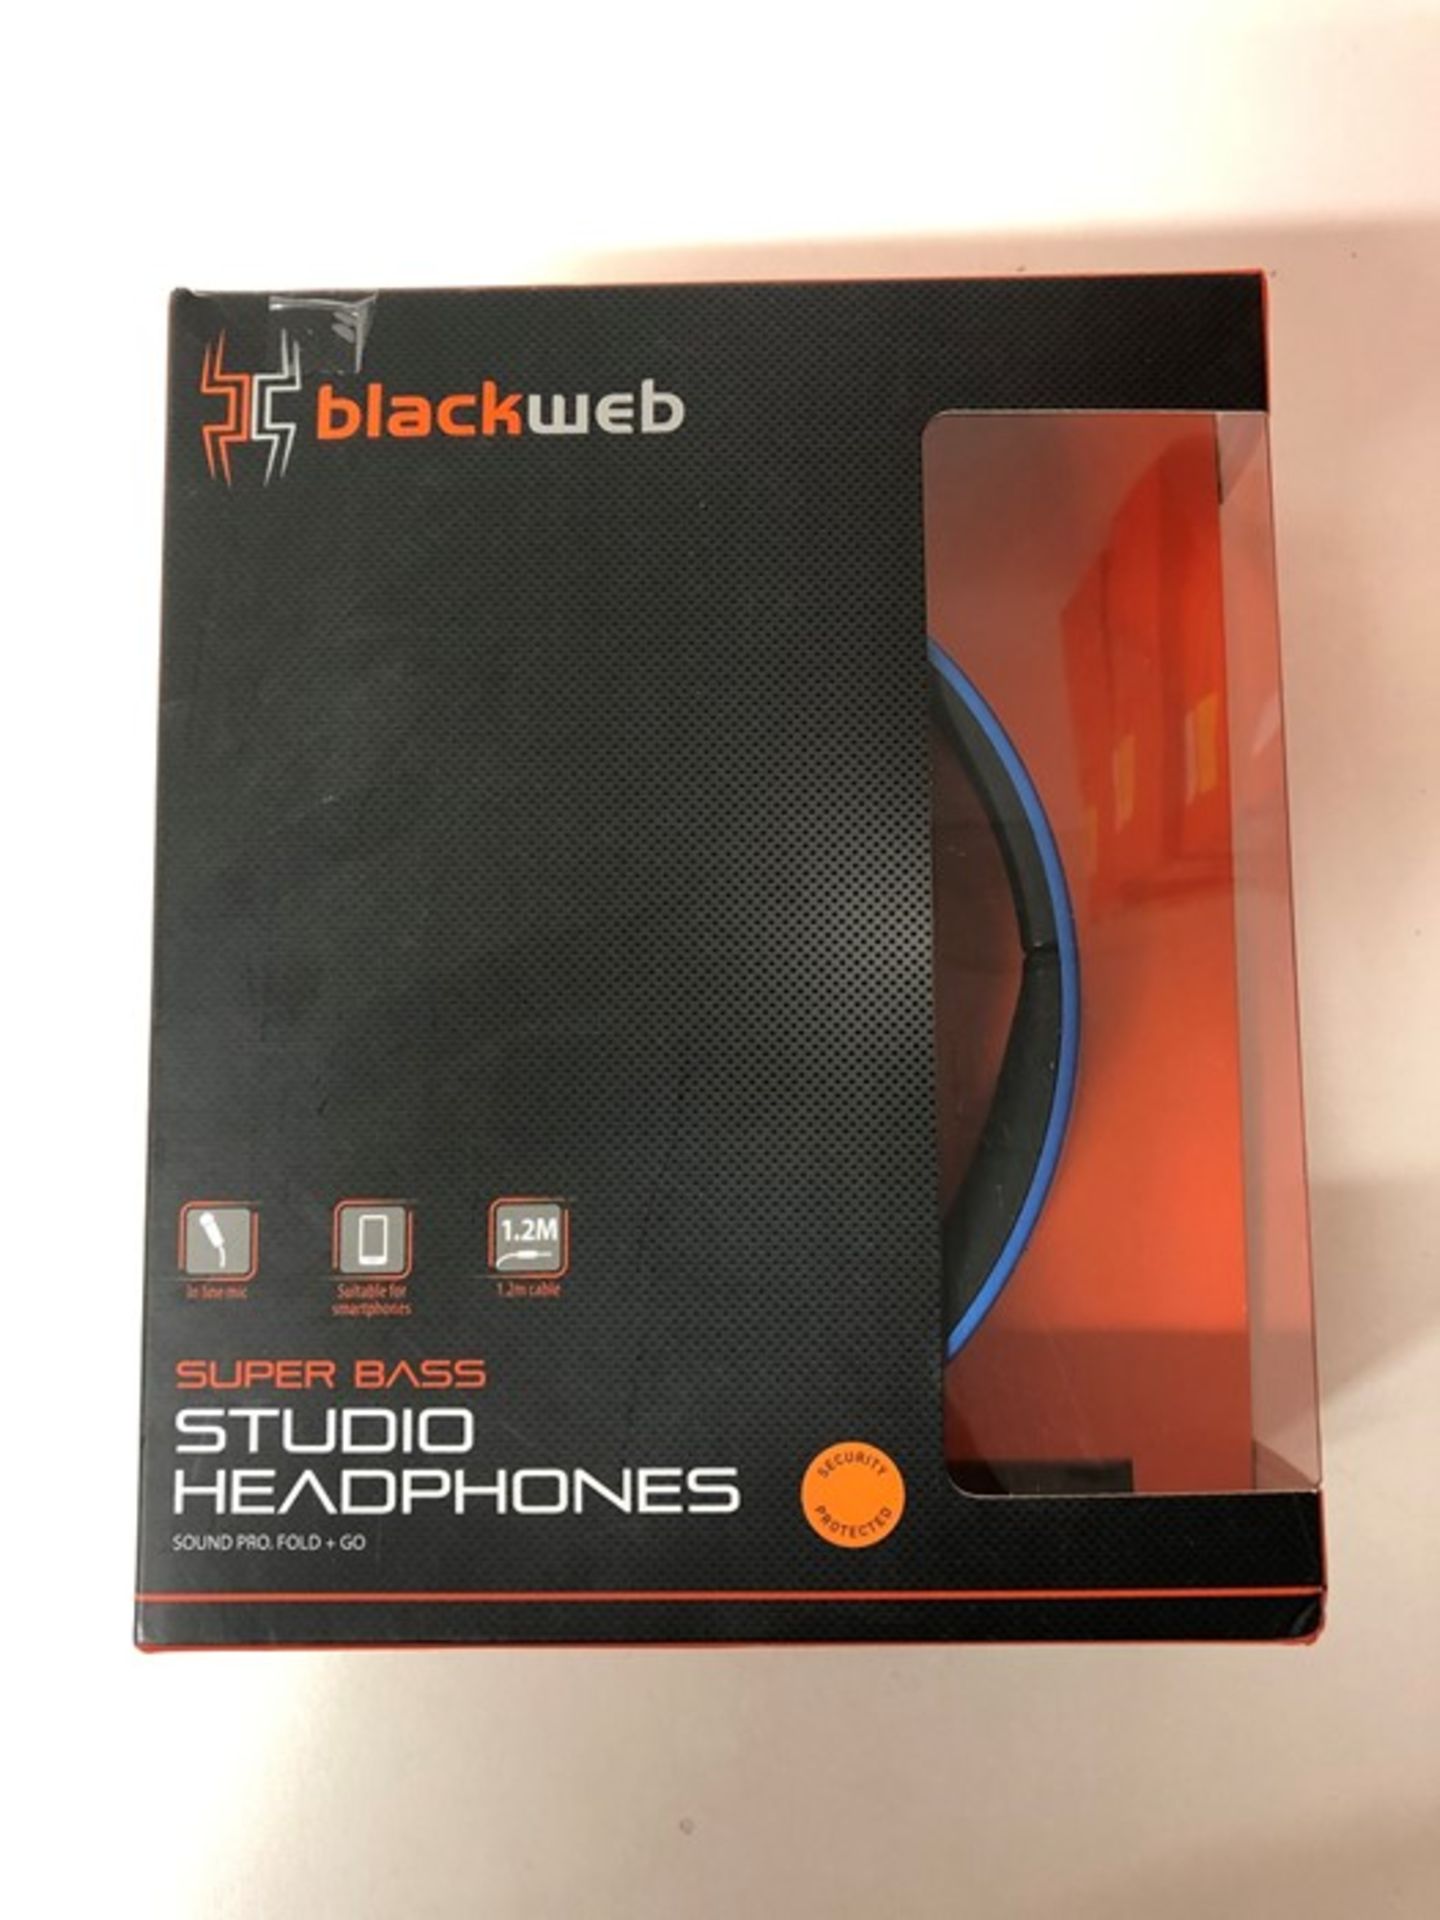 1 BOXED BLACK WEB BLUETOOTH STUDIO HEADPHONES IN BLUE / RRP £20.00 - BL 3809 (VIEWING HIGHLY